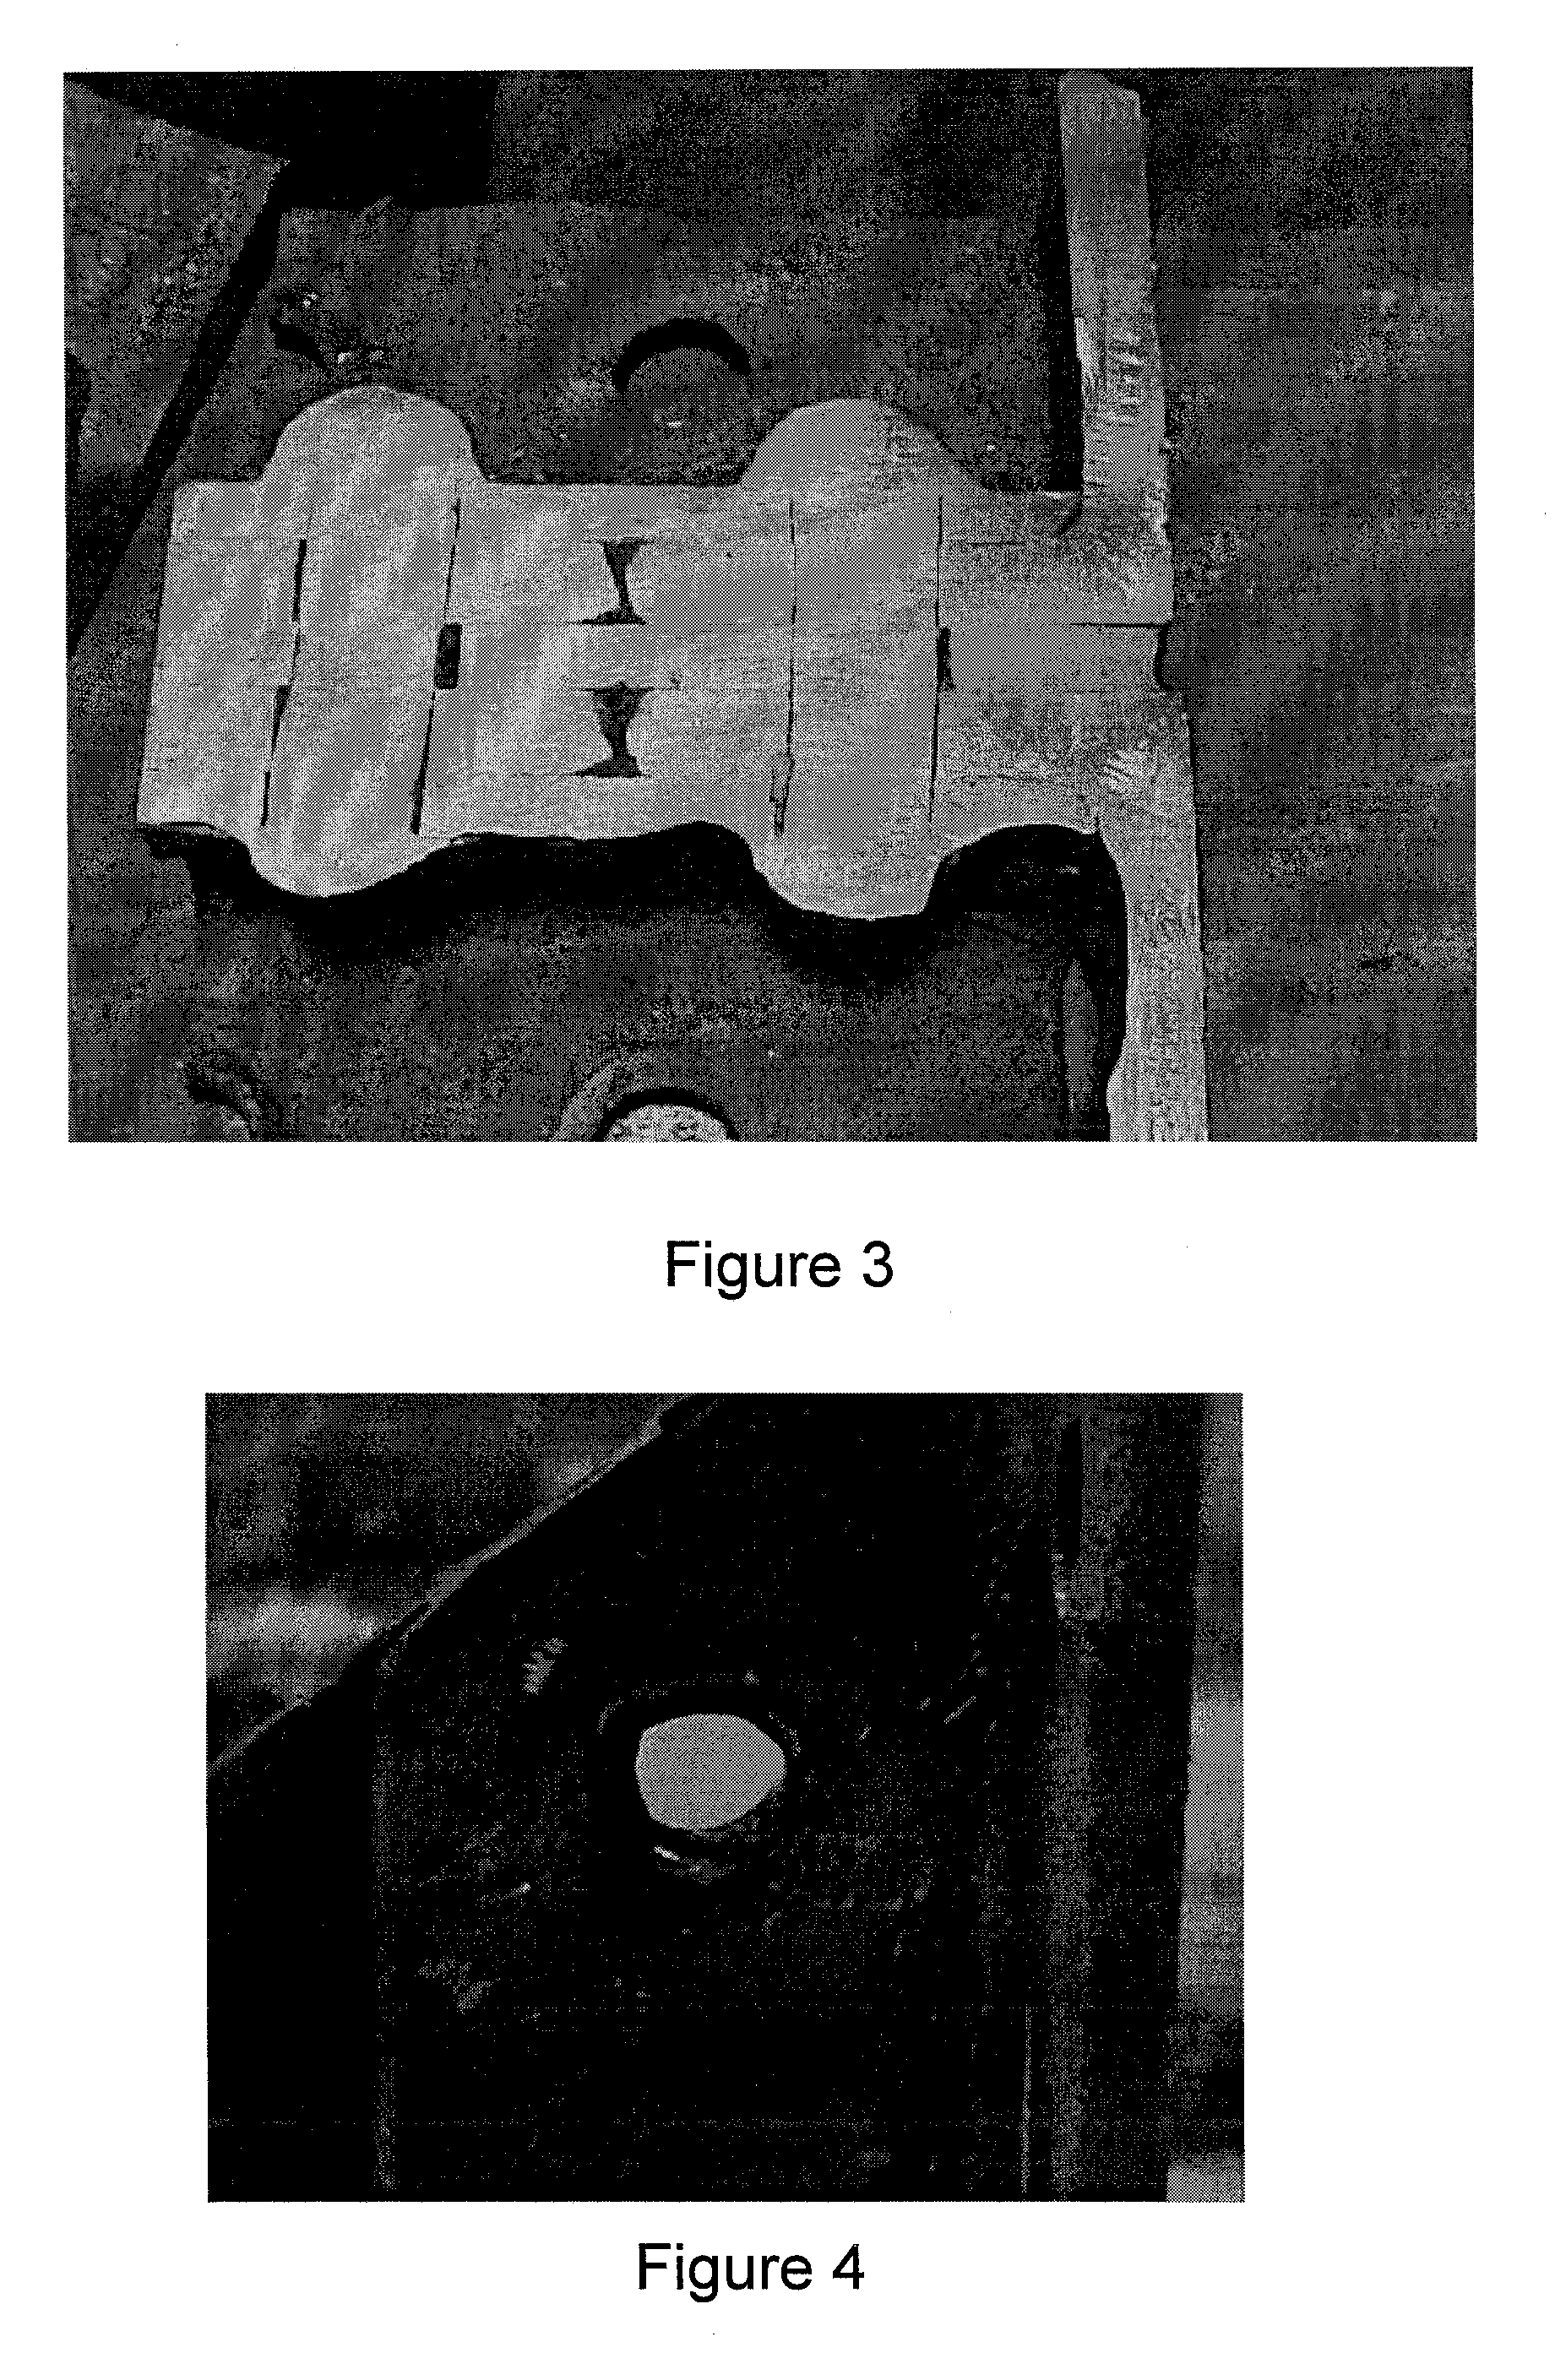 Method and apparatus for rivet removal and in-situ rehabilitation of large metal structures